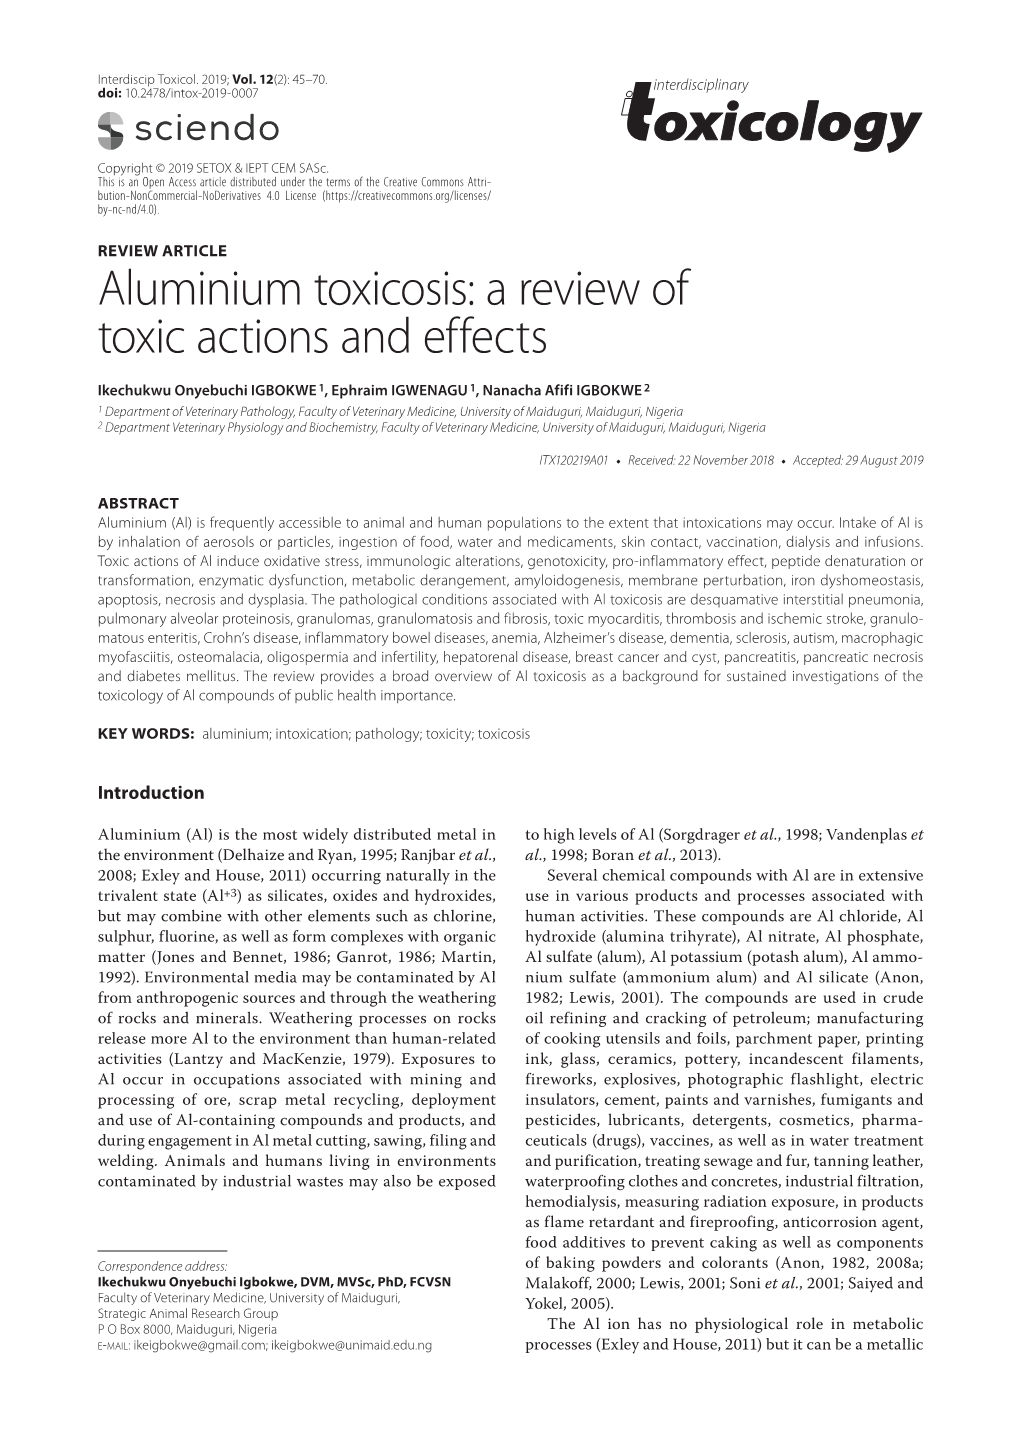 Aluminium Toxicosis: a Review of Toxic Actions and Effects